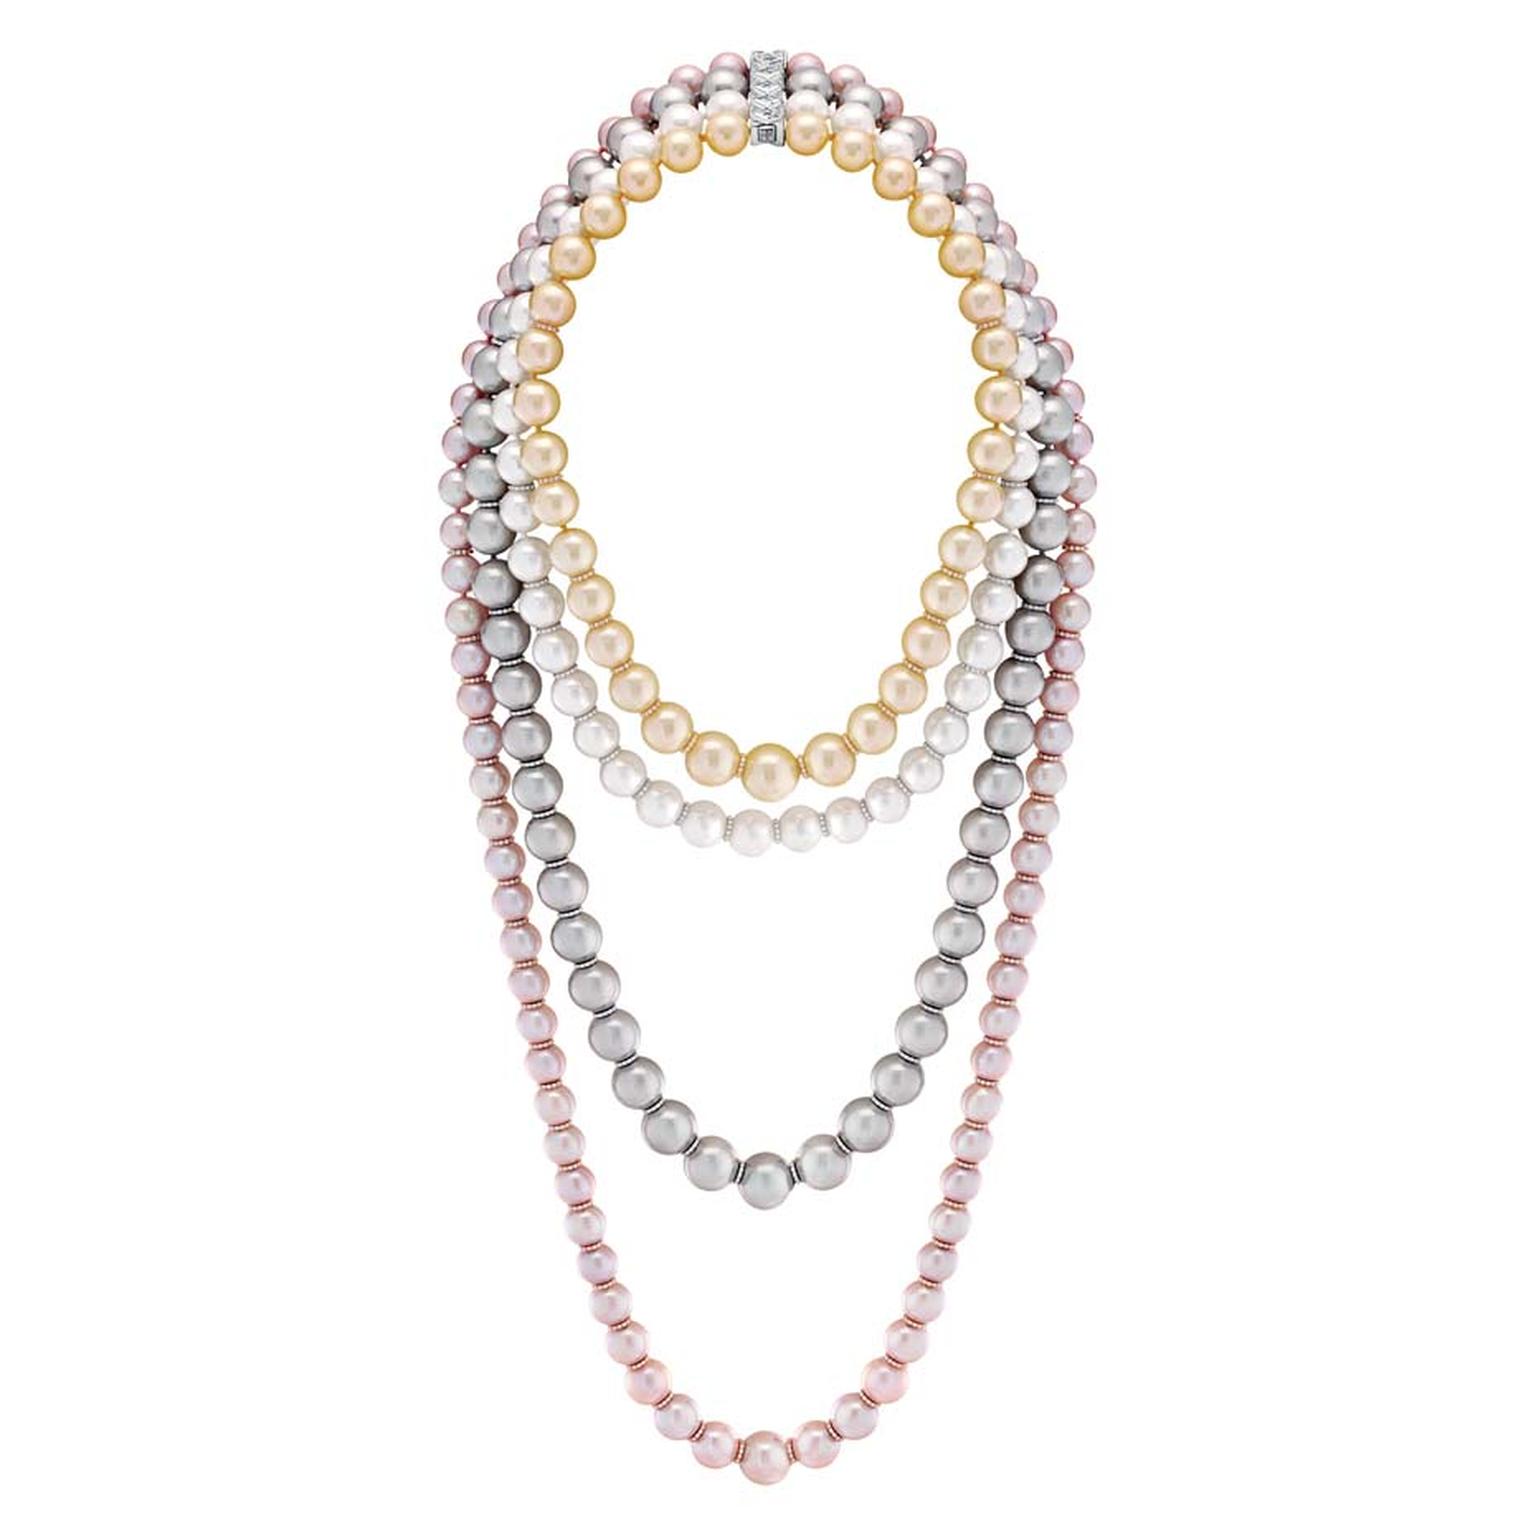 Chanel Perles Swing necklace, from the new Les Perles de Chanel collection